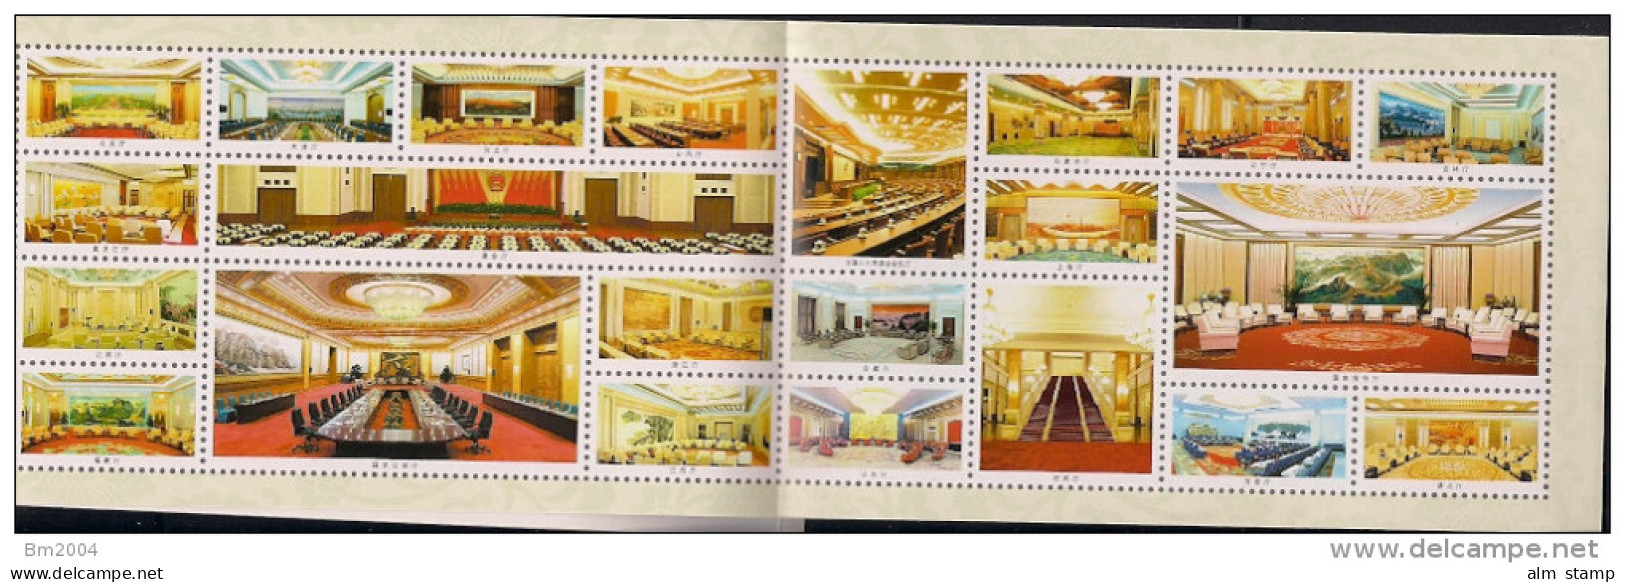 2009 China Mi.  MH SB 38 **MNH  The Great Hall Of The People - Used Stamps